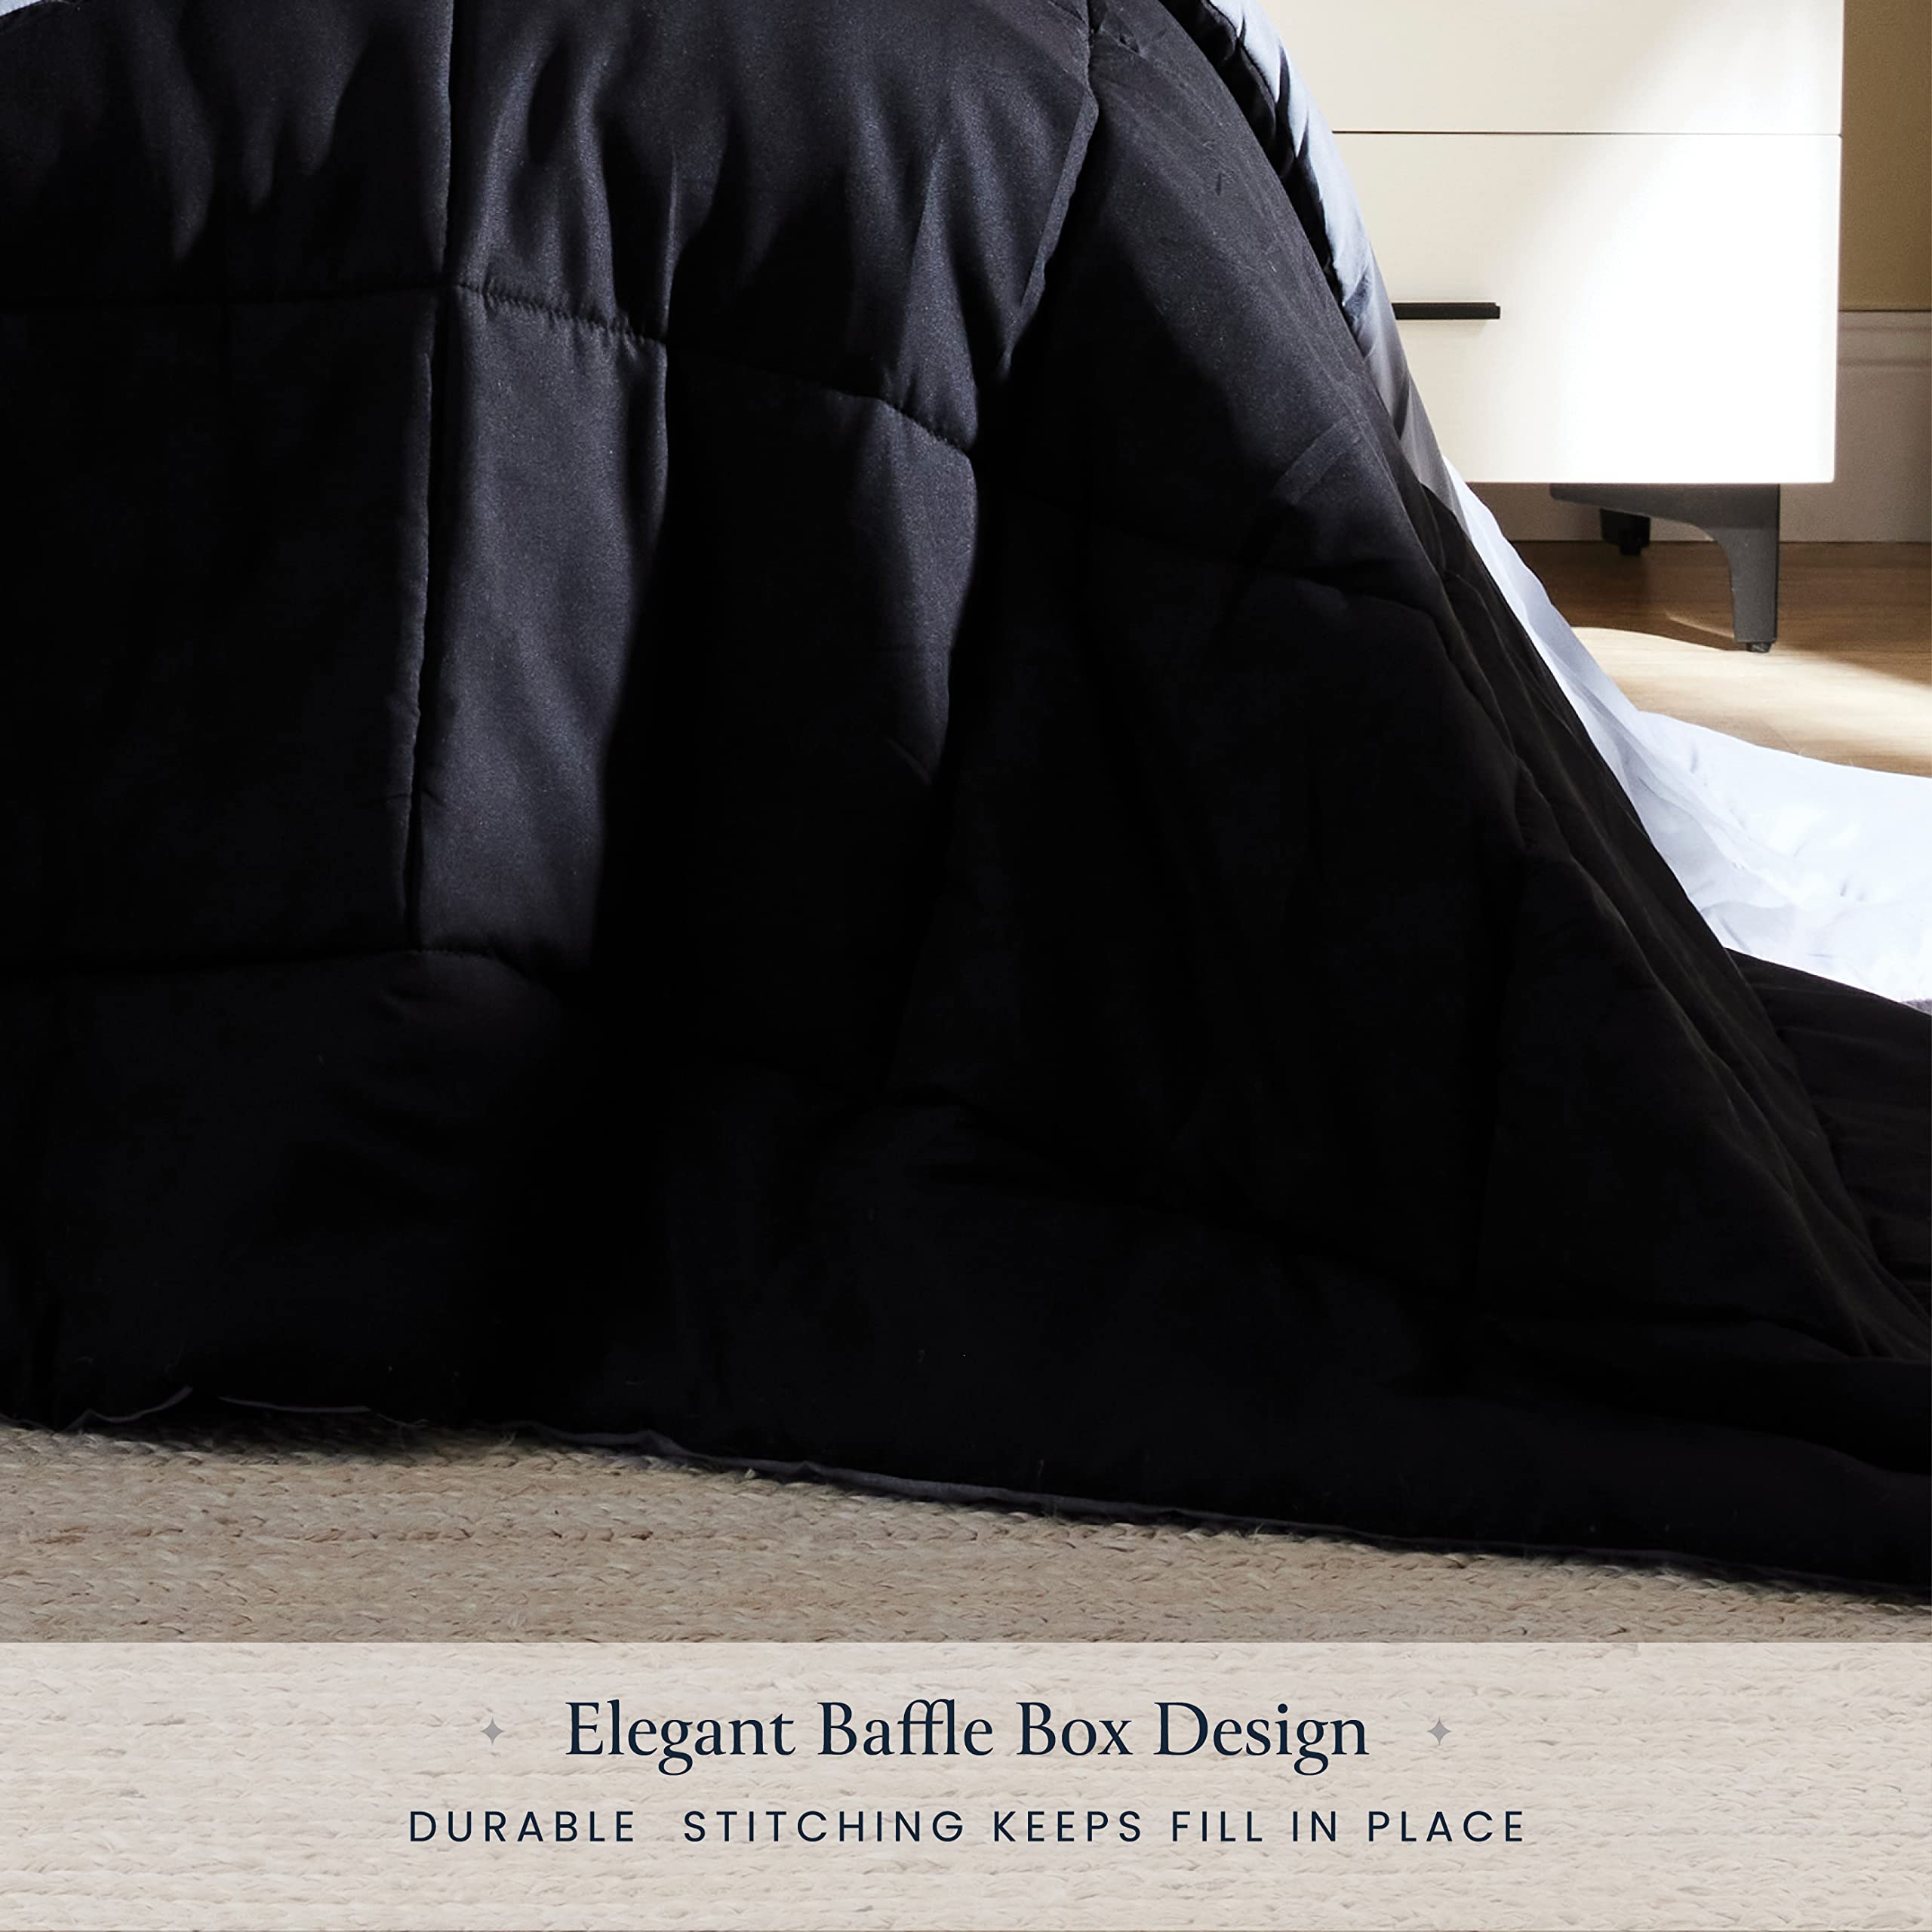 Down-Alternative Comforter Duvet Insert - All-Season Mid-Plush Cooling Comforter - Perfect for Hot Sleepers - Soft & Fluffy Bed Comforter, Elegant Box Quilted Comforters  - Very Good